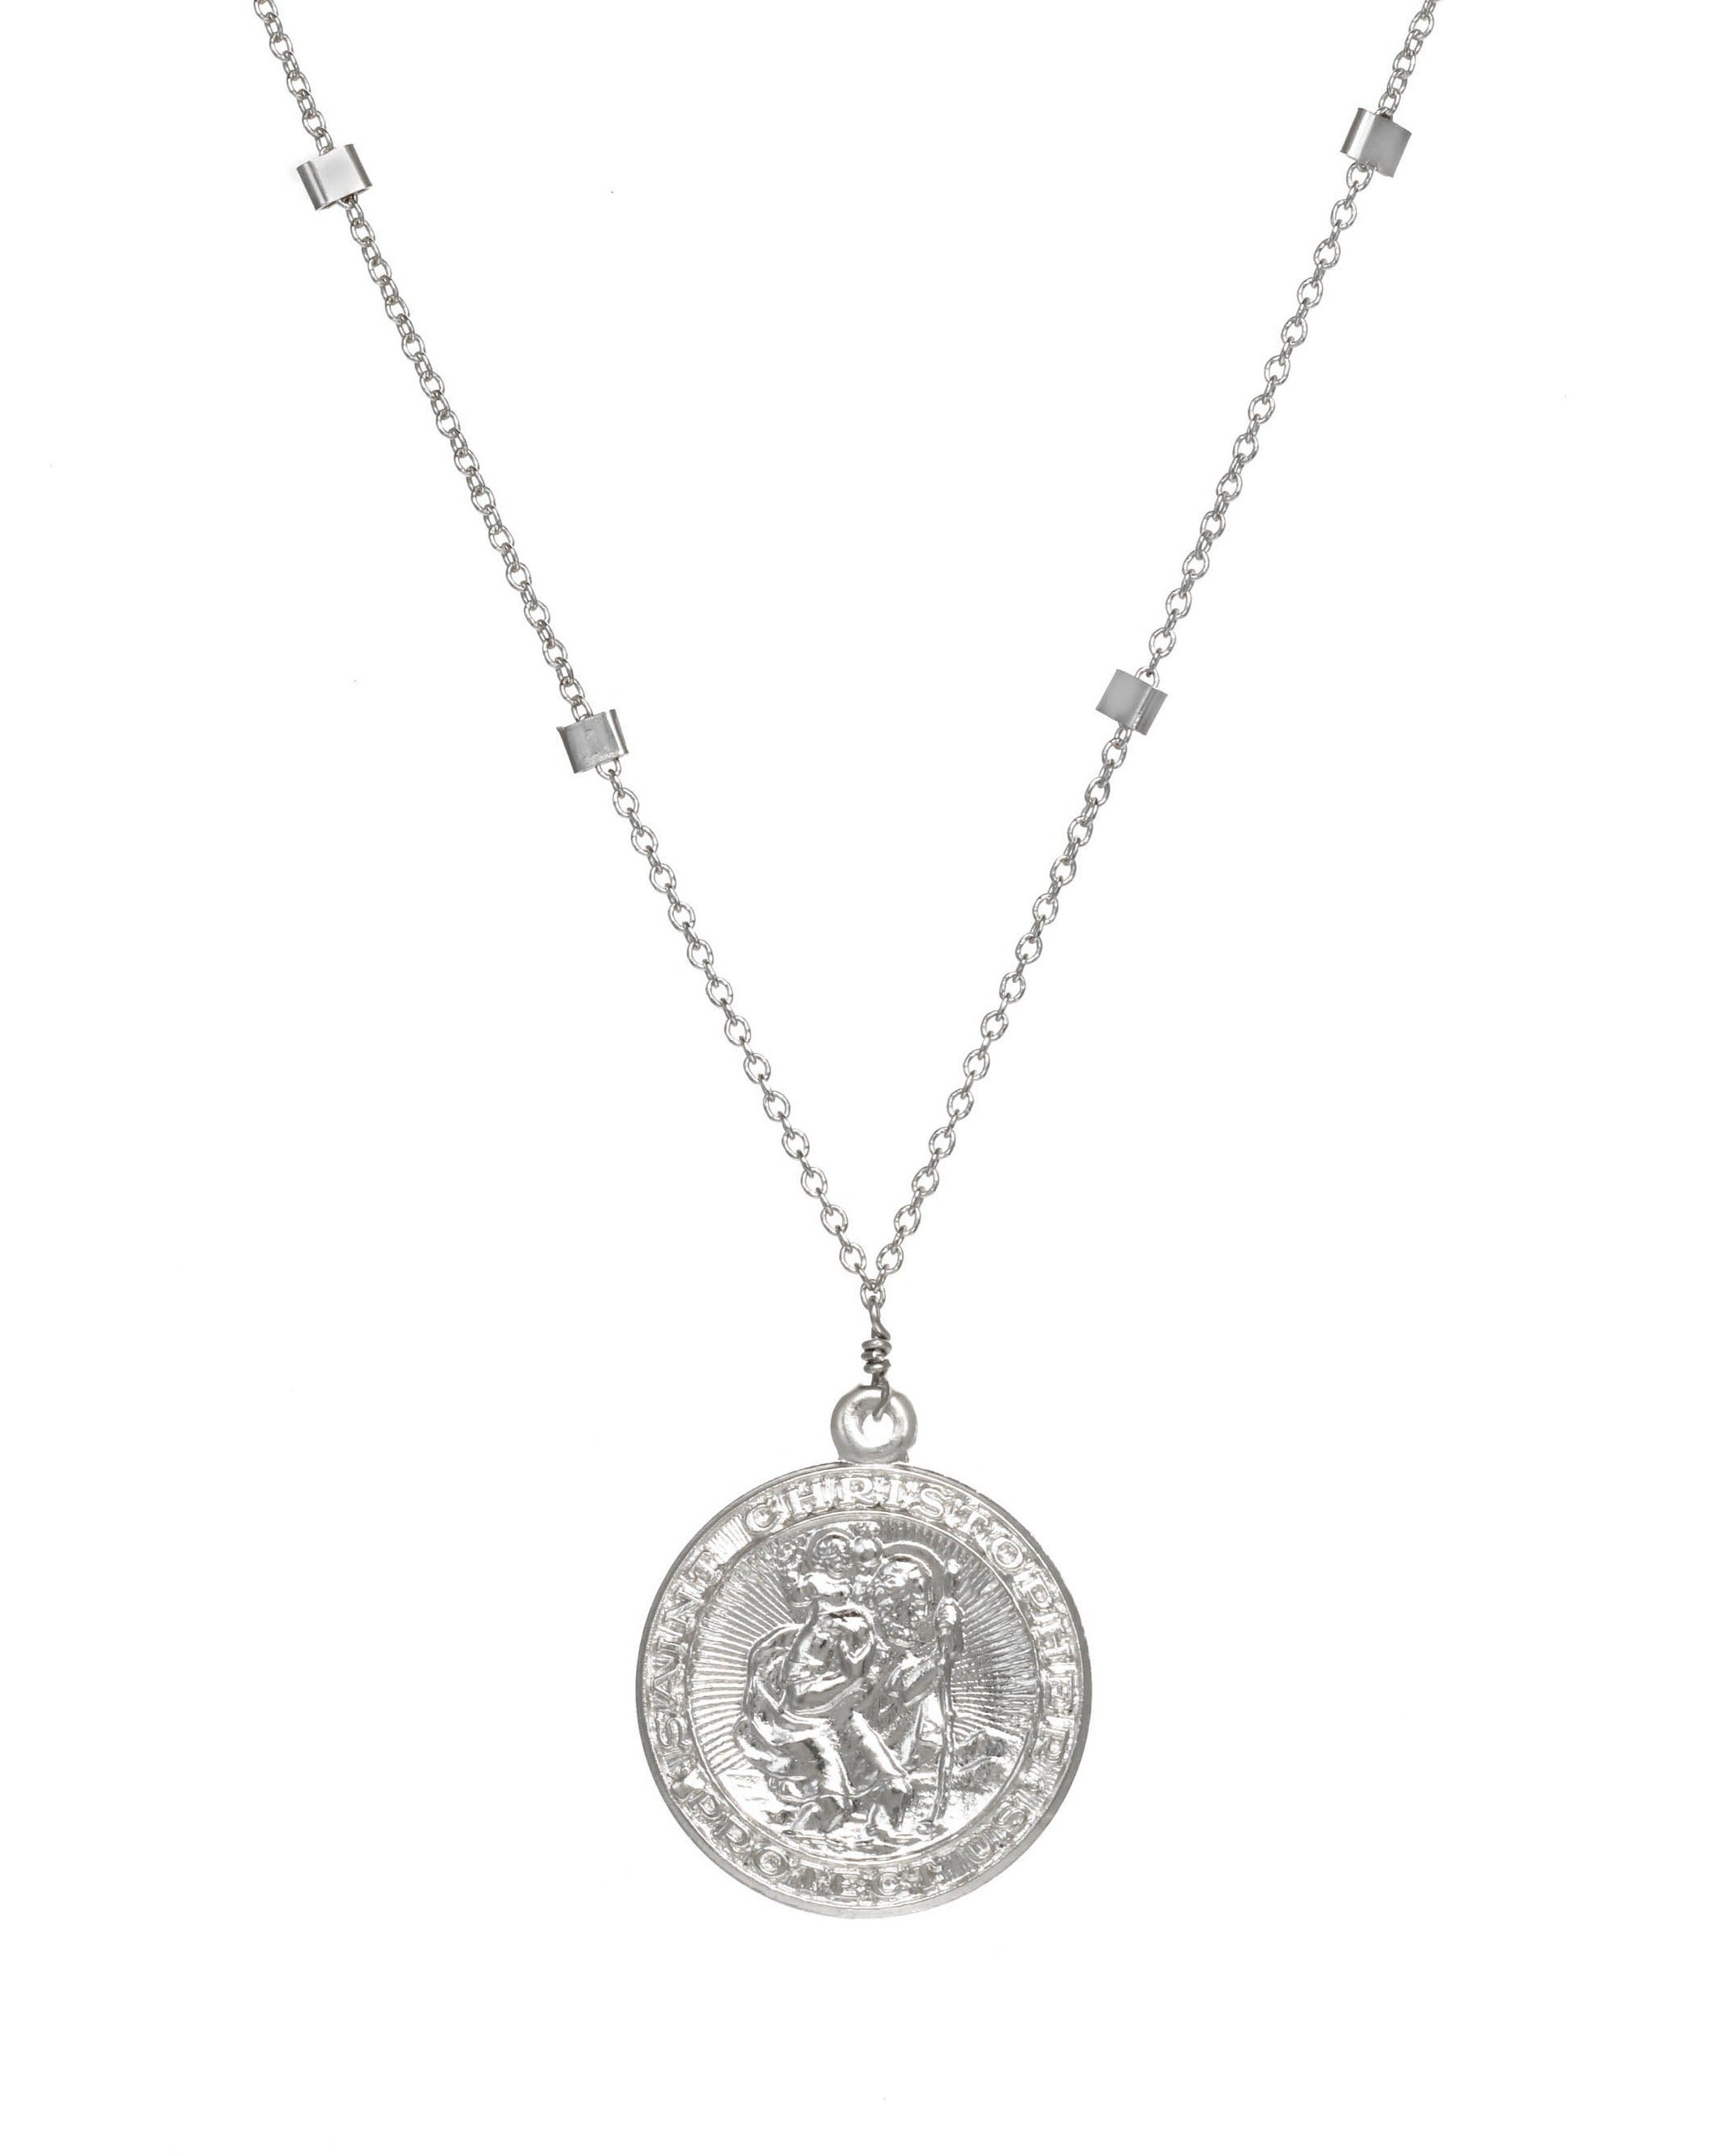 San Cris Necklace by KOZAKH. A 16 to 18 inch adjustable length necklace, crafted in Sterling Silver, featuring a 16mm Saint Christopher Medallion.